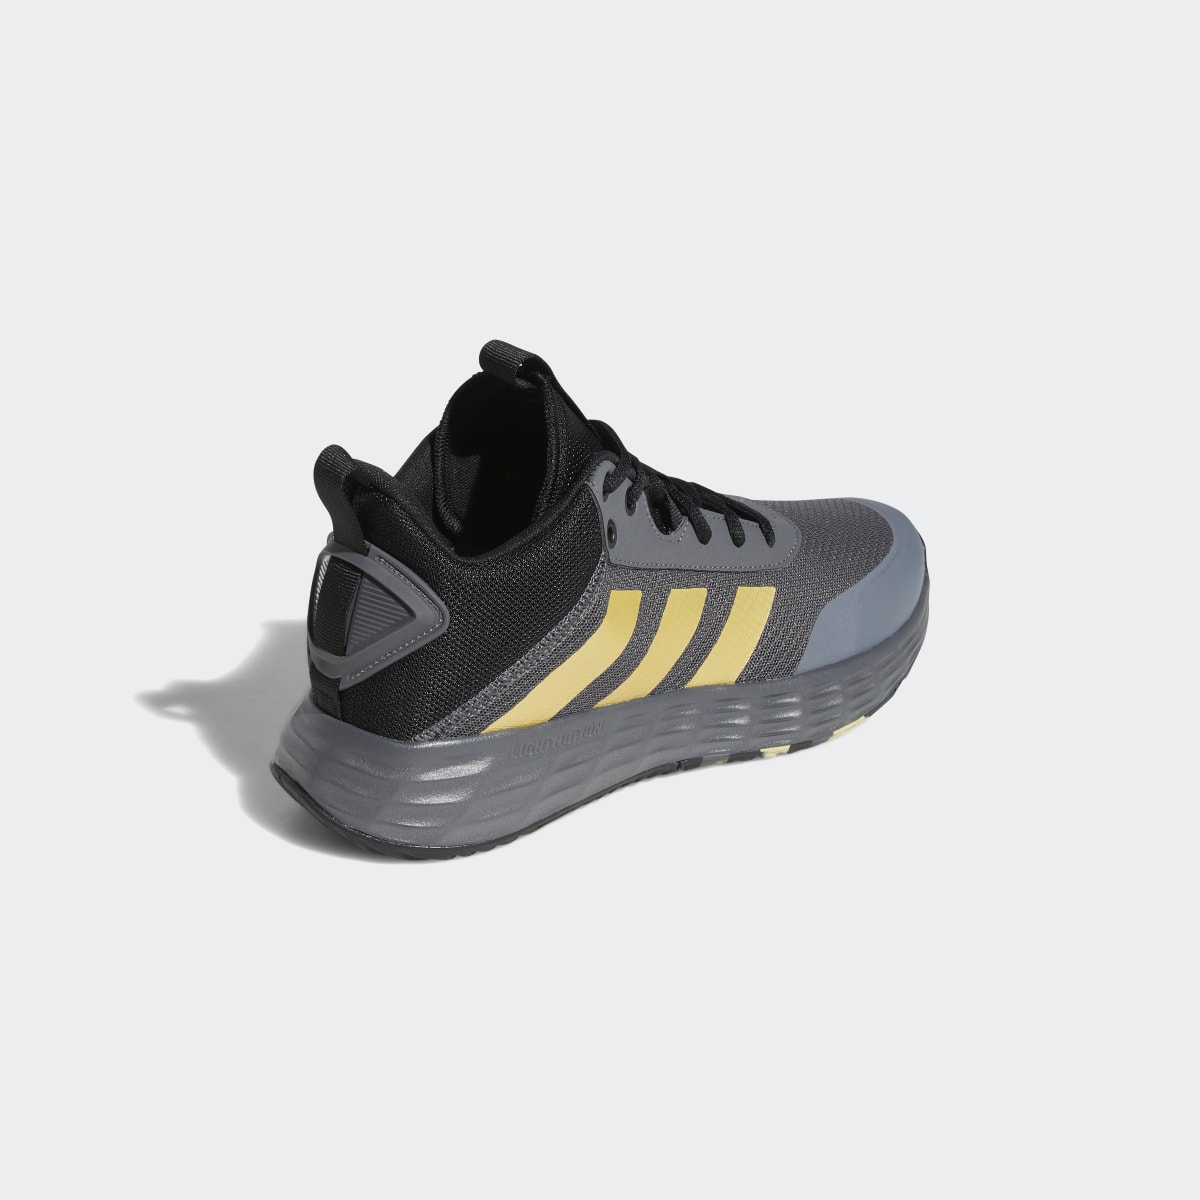 Adidas Ownthegame Basketball Shoes. 6